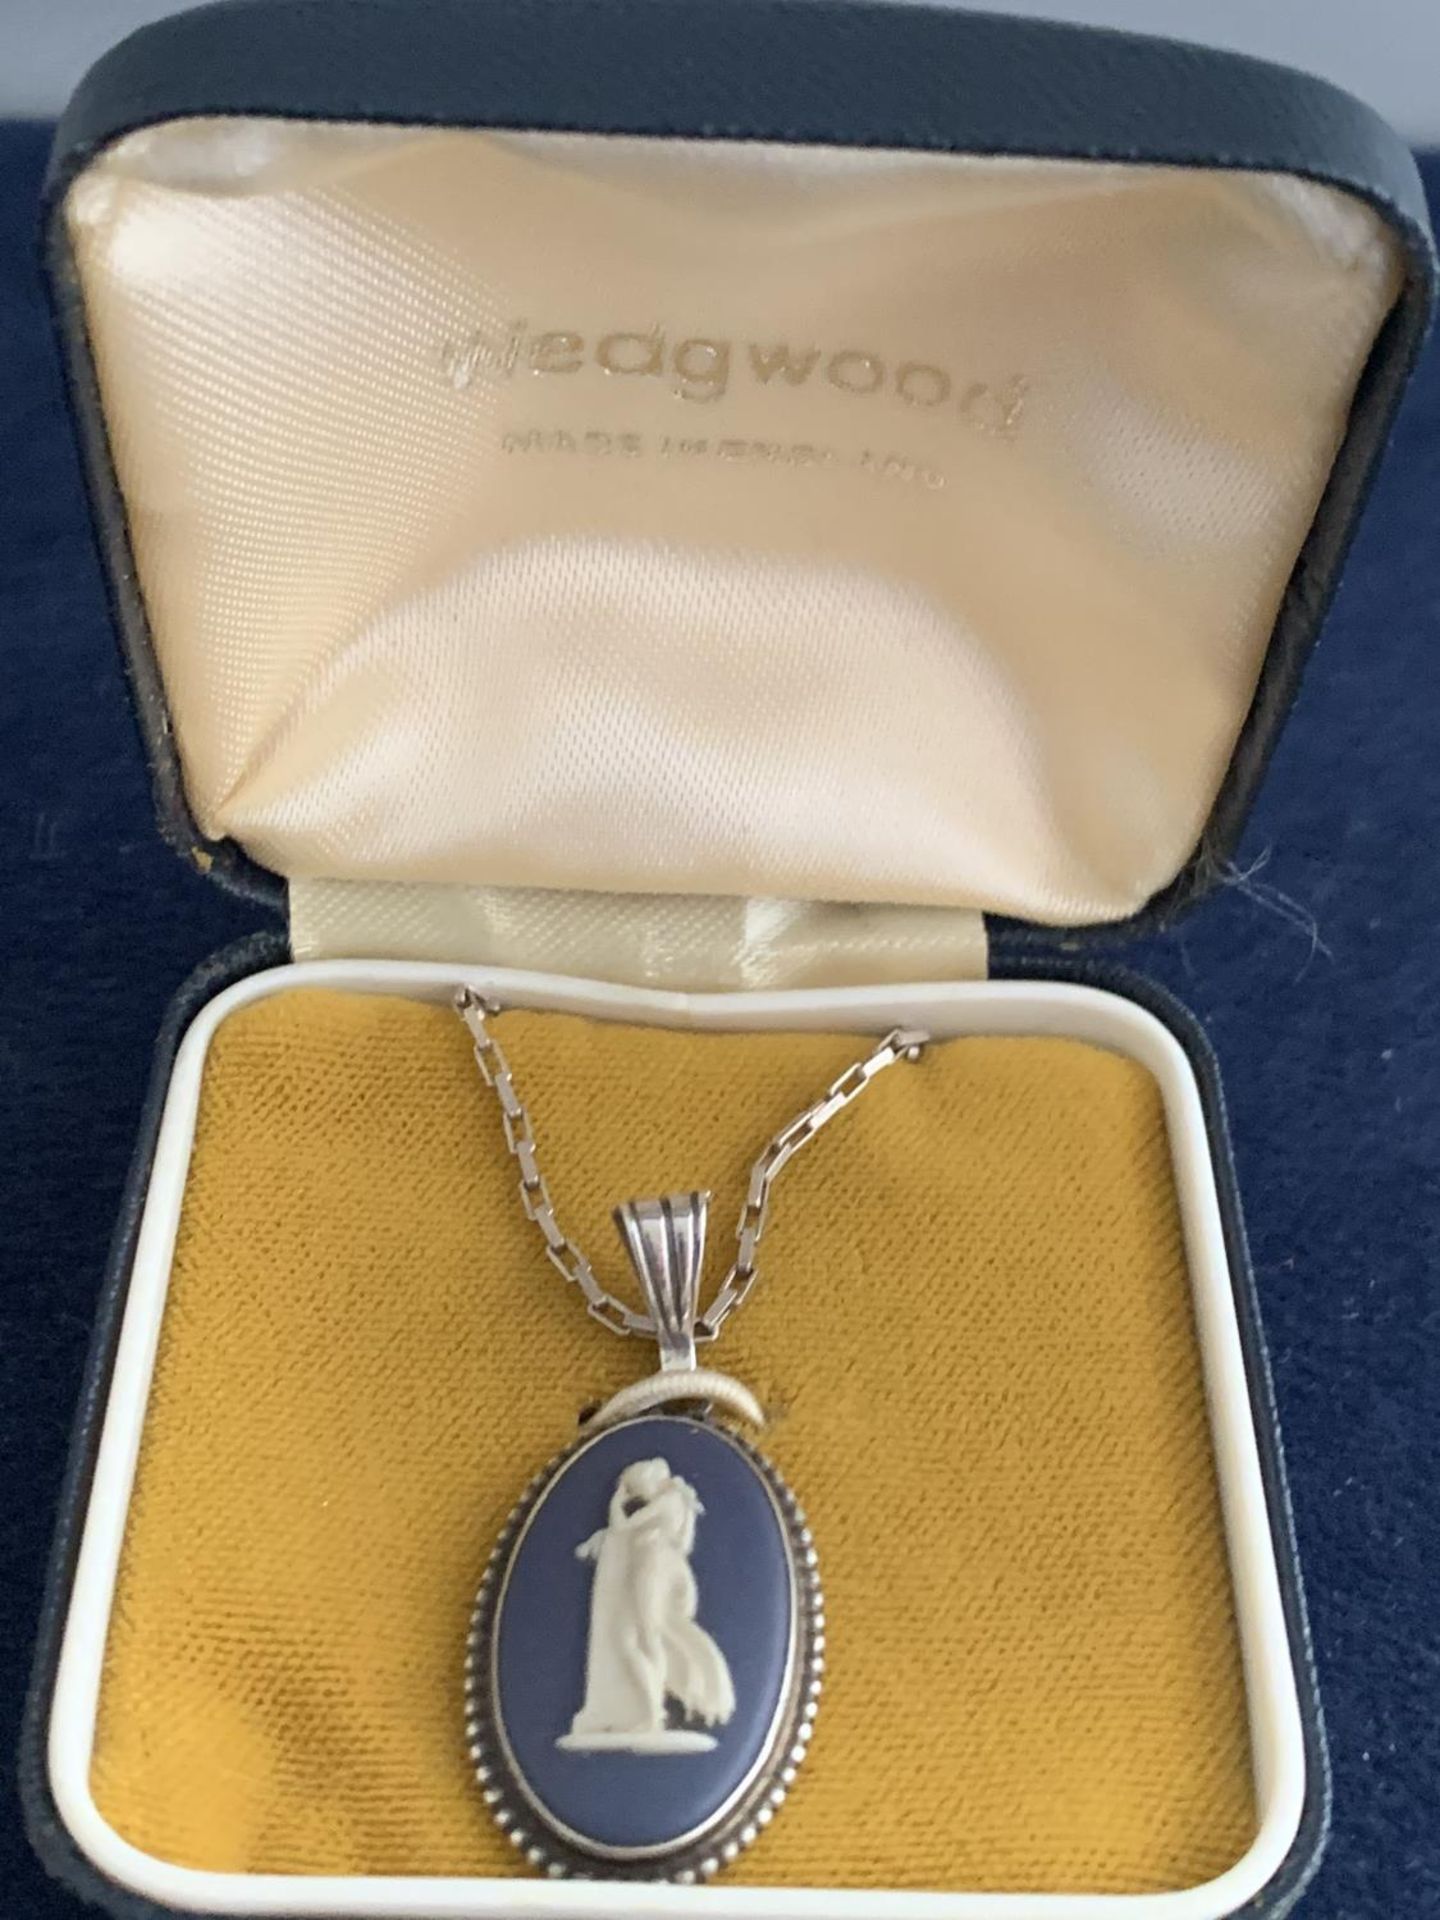 A SILVER DARK BLUE AND WHITE WEDGEWOOD NECKLACE